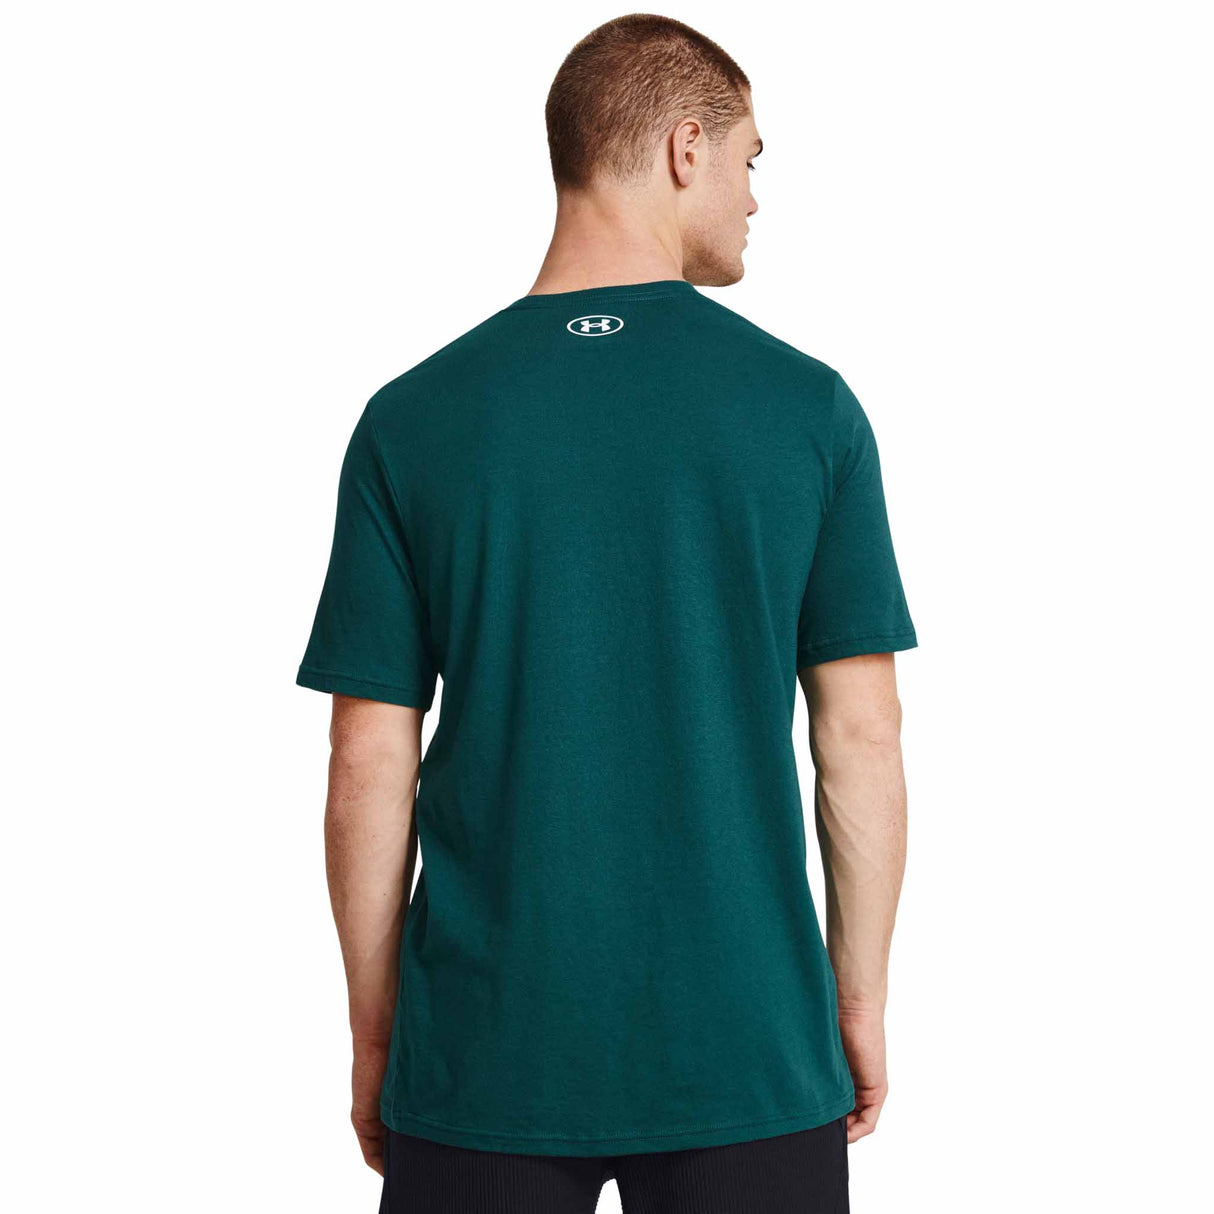 Under Armour GL Foundation Update t-shirt homme dos live - Hydro Teal / White